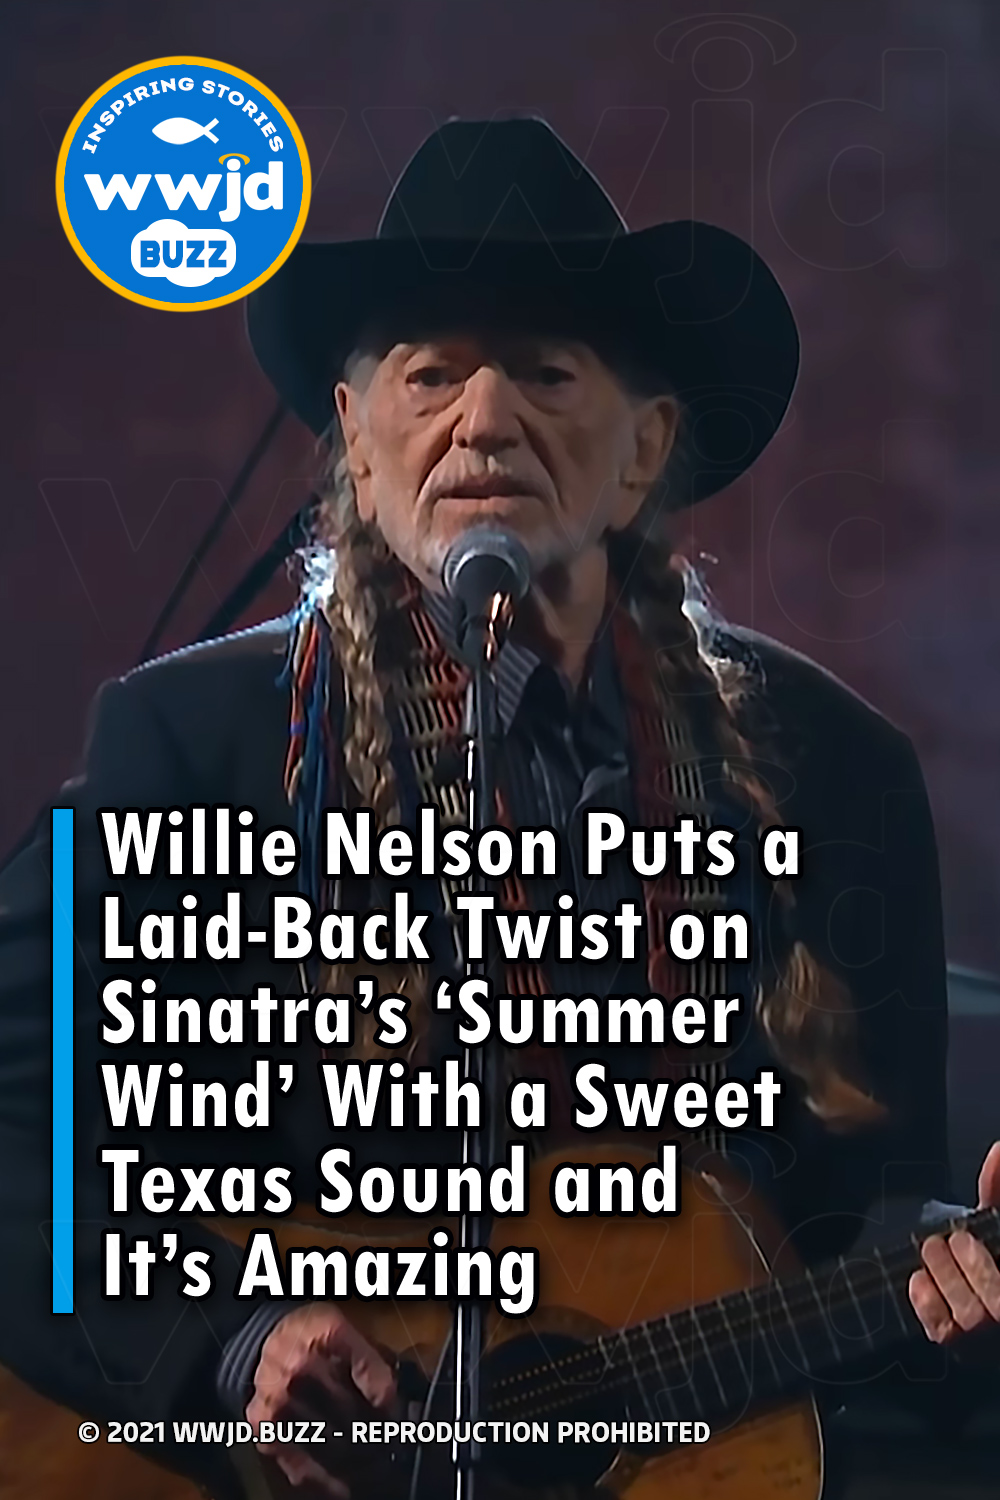 Willie Nelson Puts a Laid-Back Twist on Sinatra\'s \'Summer Wind\' With a Sweet Texas Sound and It\'s Amazing